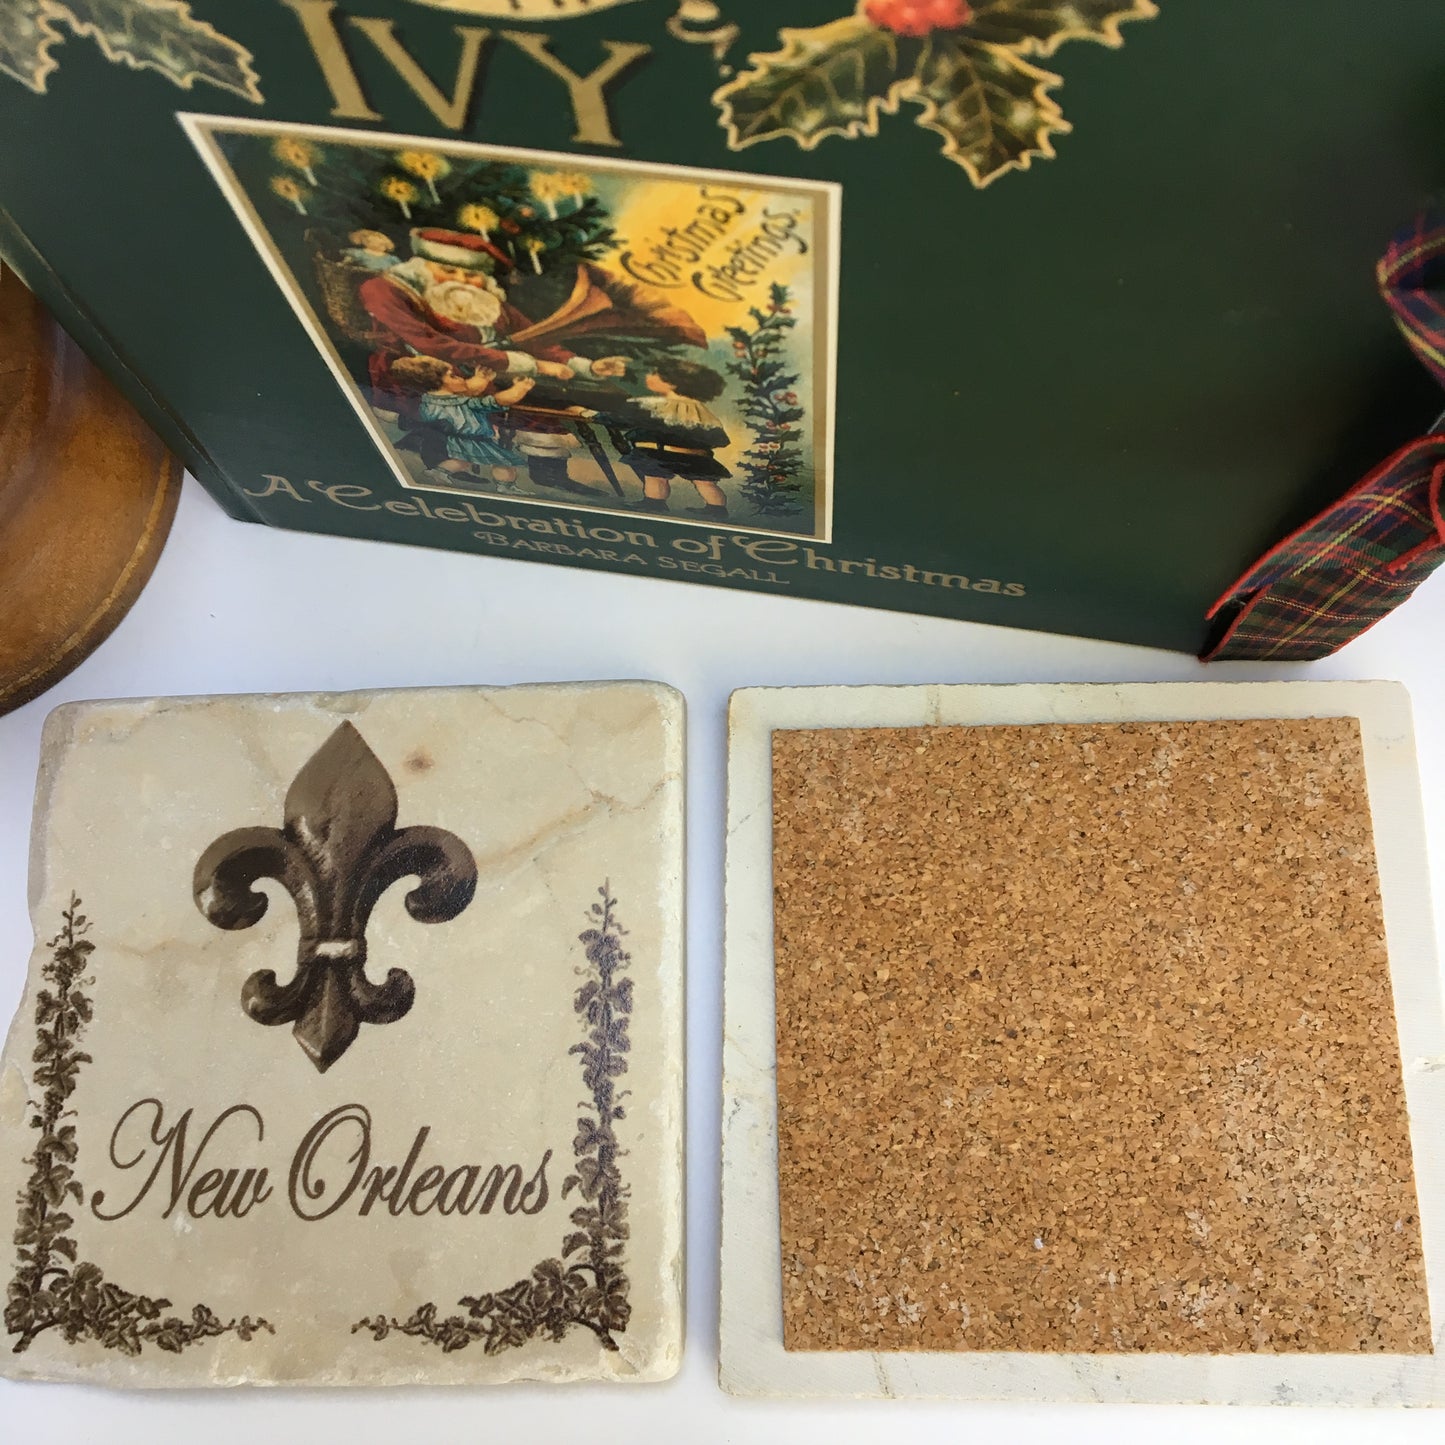 Marble coaster designed especially for the city of New Orleans.  It features an image of a silver medallion and "New Orleans".  Each marble coaster is 4" x 4" and has cork backing.  It is perfect for hot drinks and cold drinks.